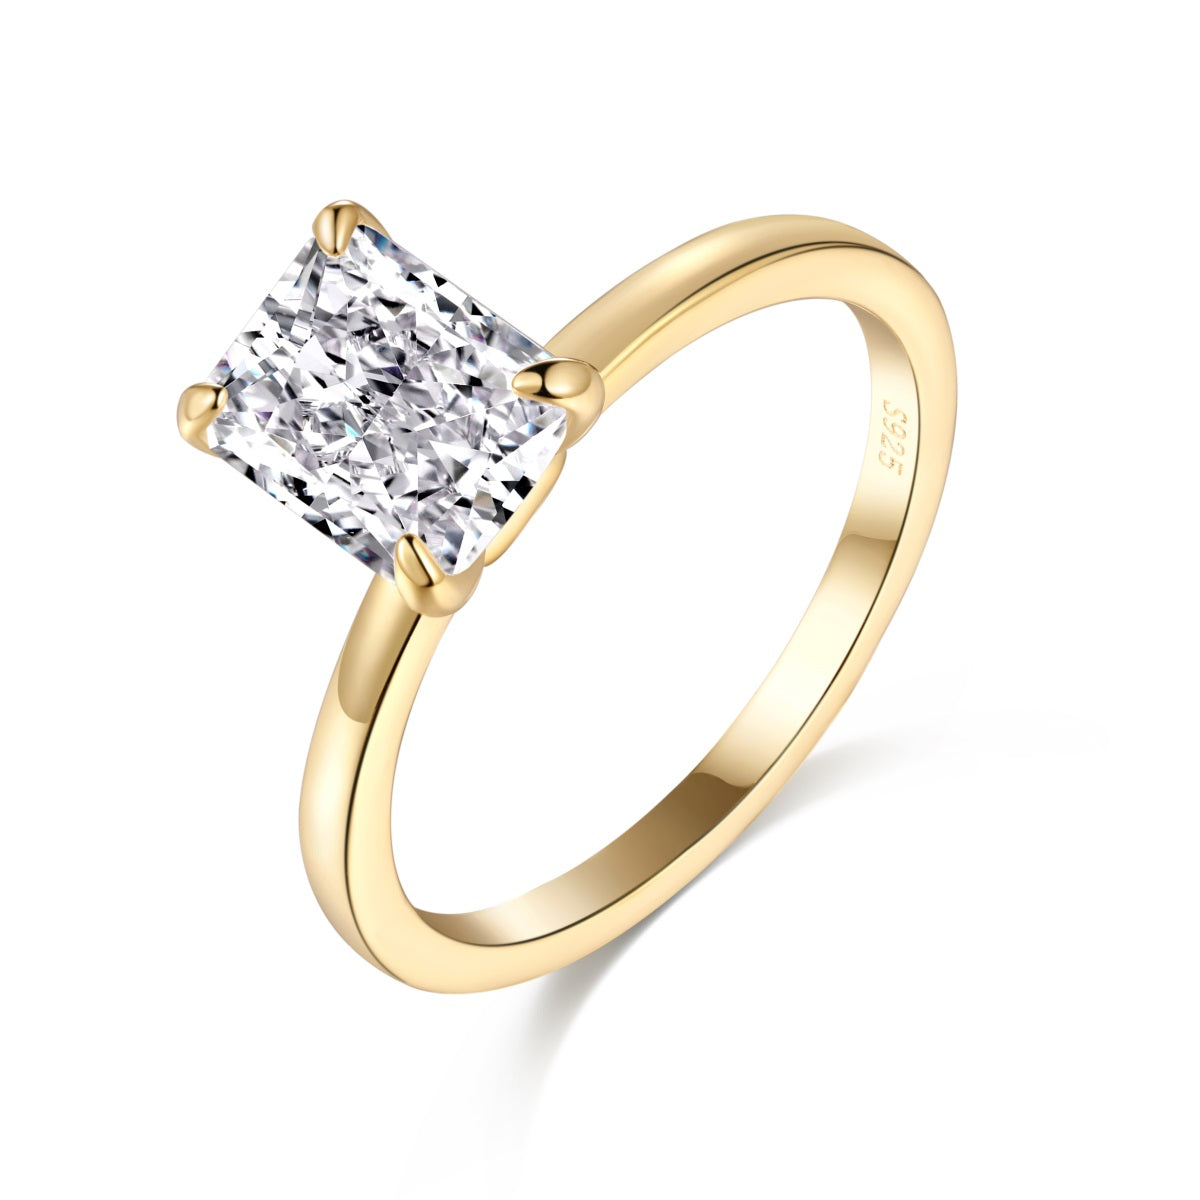 MONTE CARLO RING - GOLD SOLITAIRE